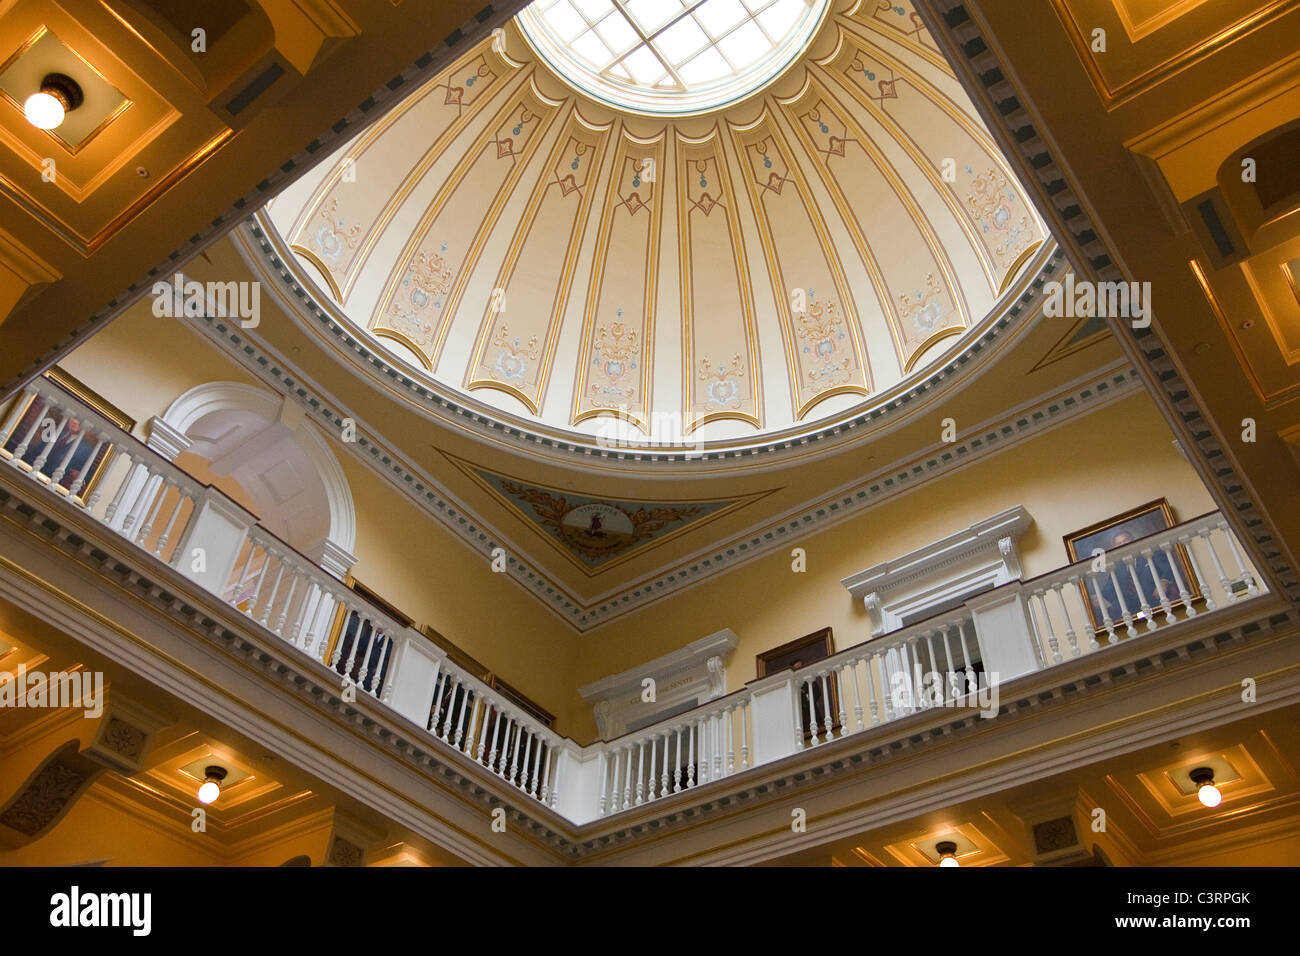 Dome above the rotunda of the state capitol building in Richmond, VA Stock Photo